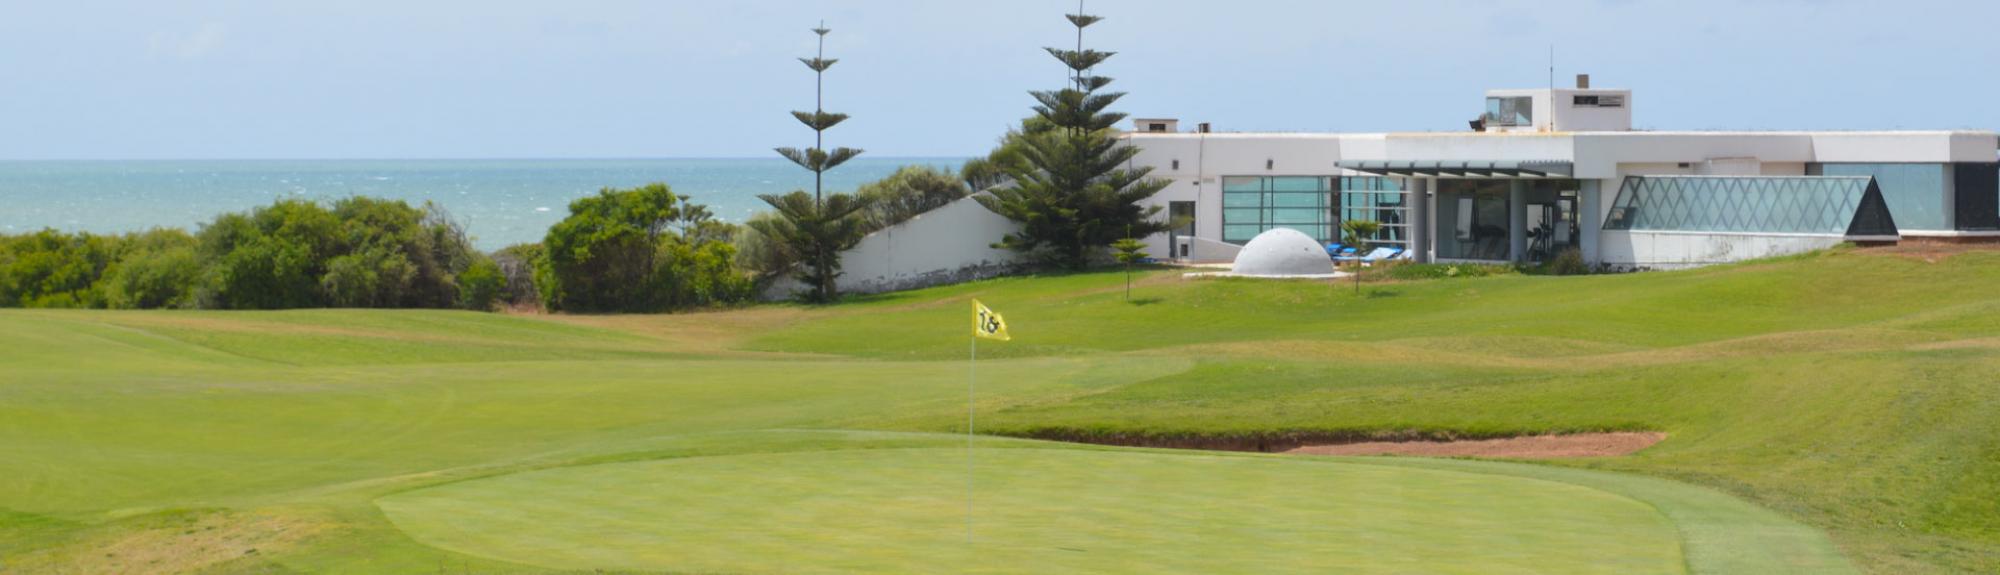 The Royal Golf El Jadida's impressive golf course situated in fantastic Morocco.